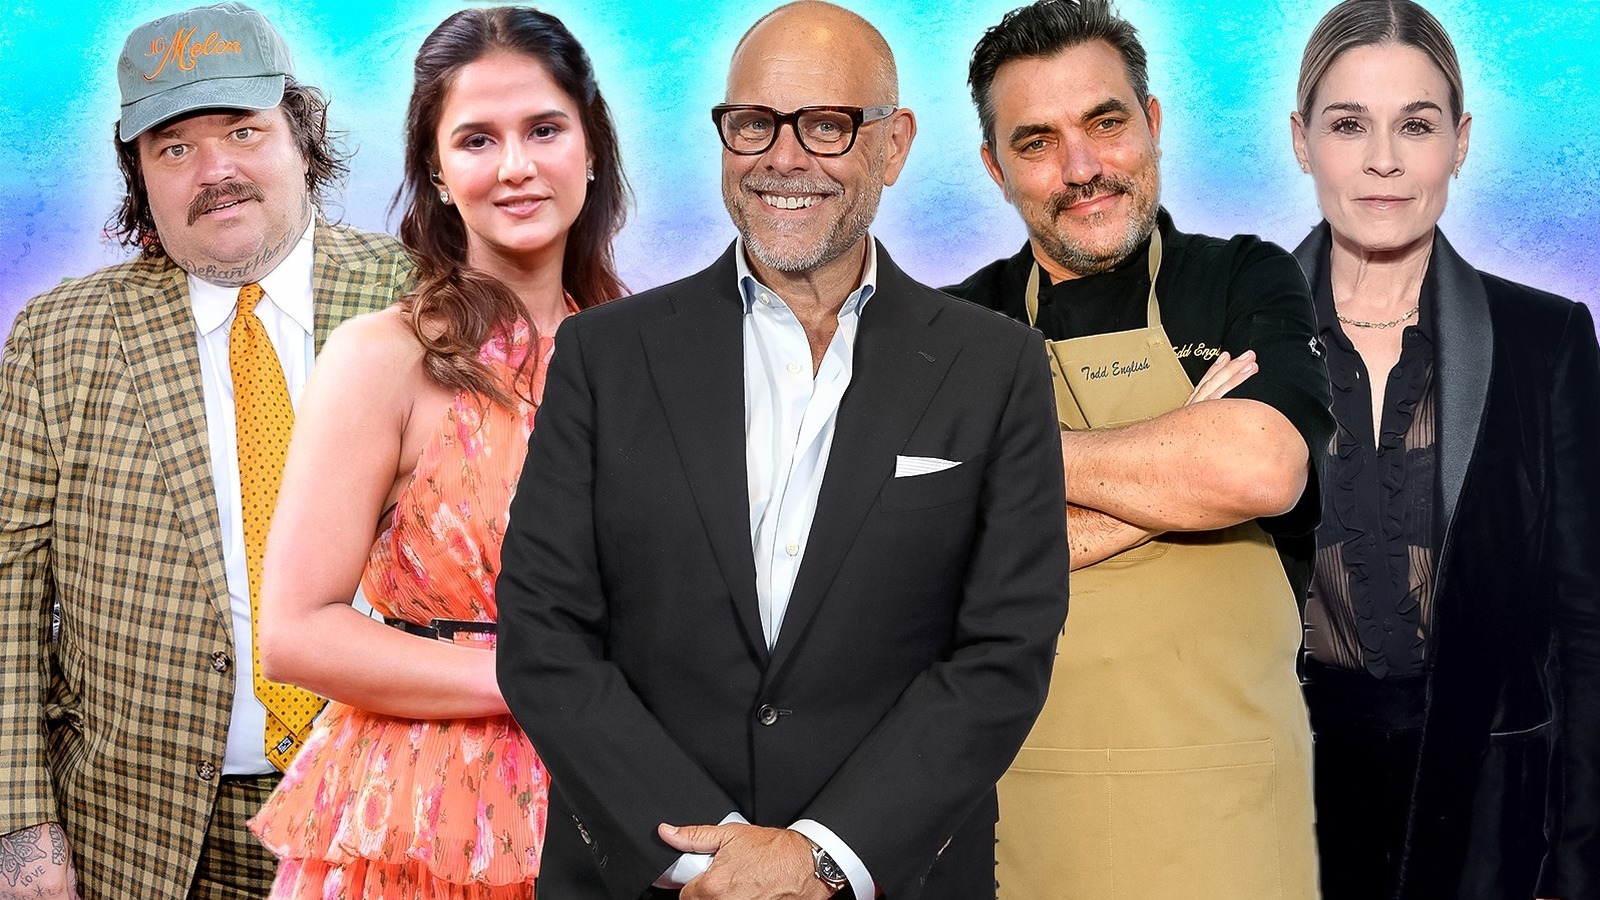 https://www.mashed.com/img/gallery/the-most-expensive-celebrity-chefs-you-can-connect-with-on-cameo/l-intro-1688858779.jpg